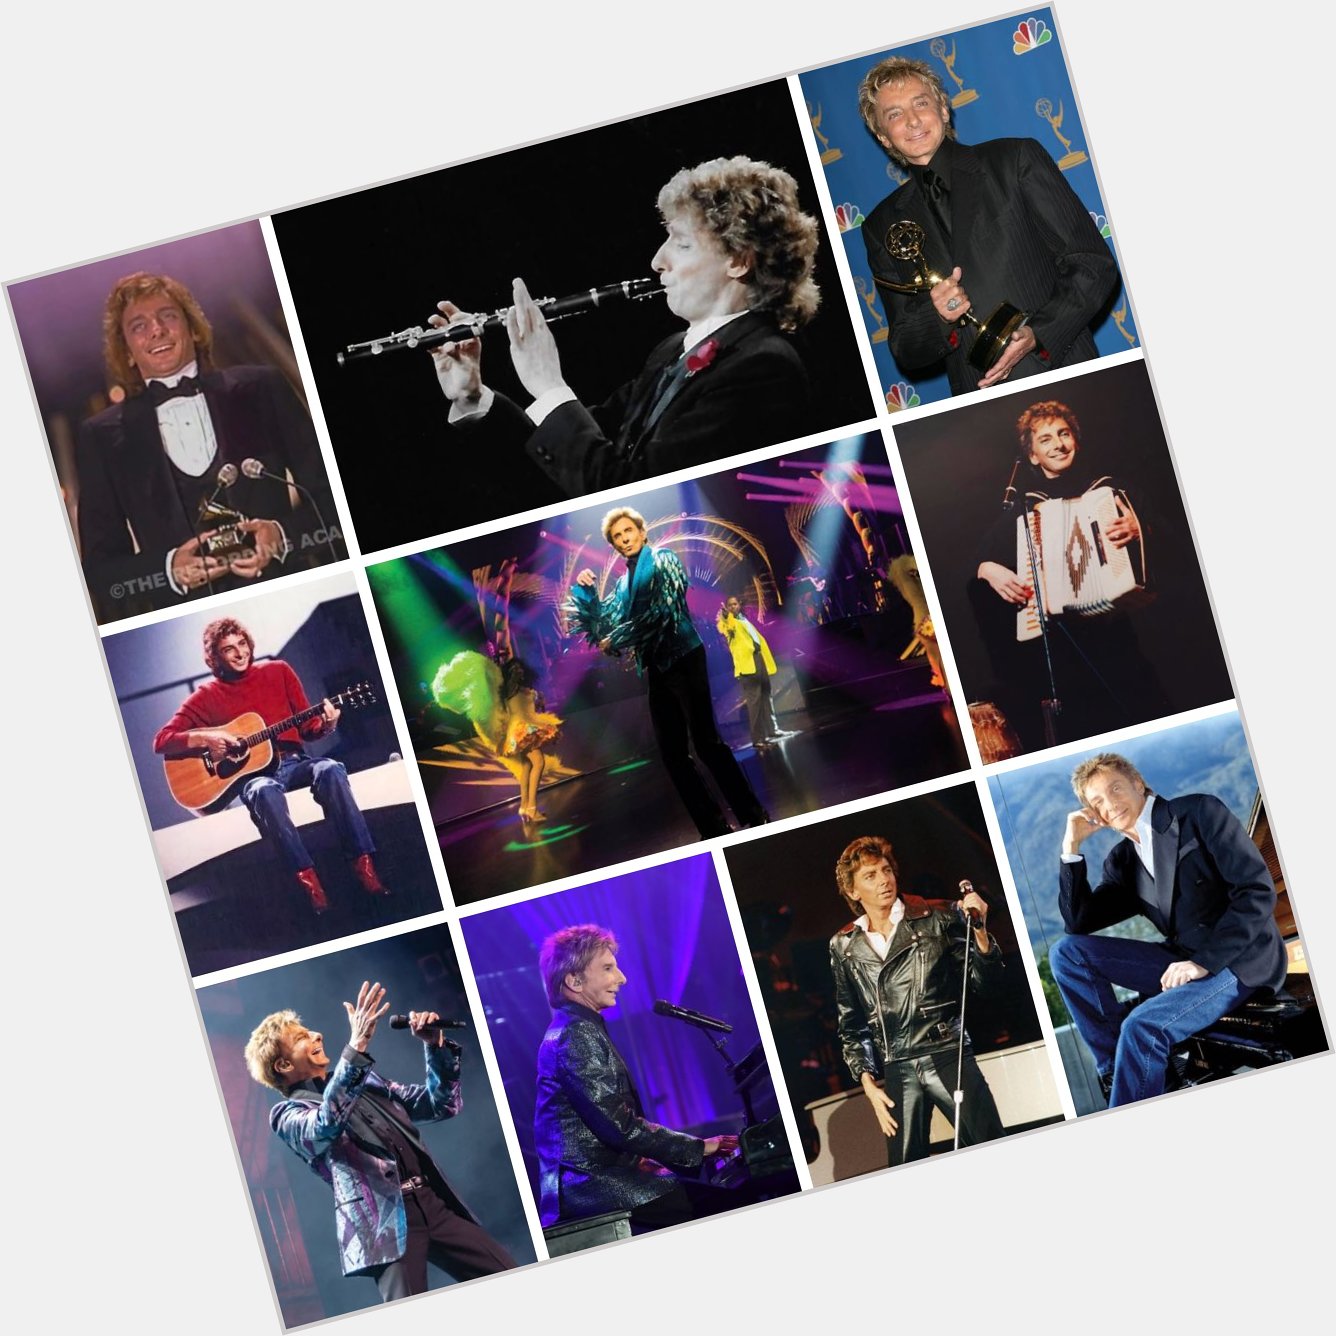 A Happy Birthday To Singer - Songwriter And Producer Barry Manilow Who Turns The Big 80 Today 